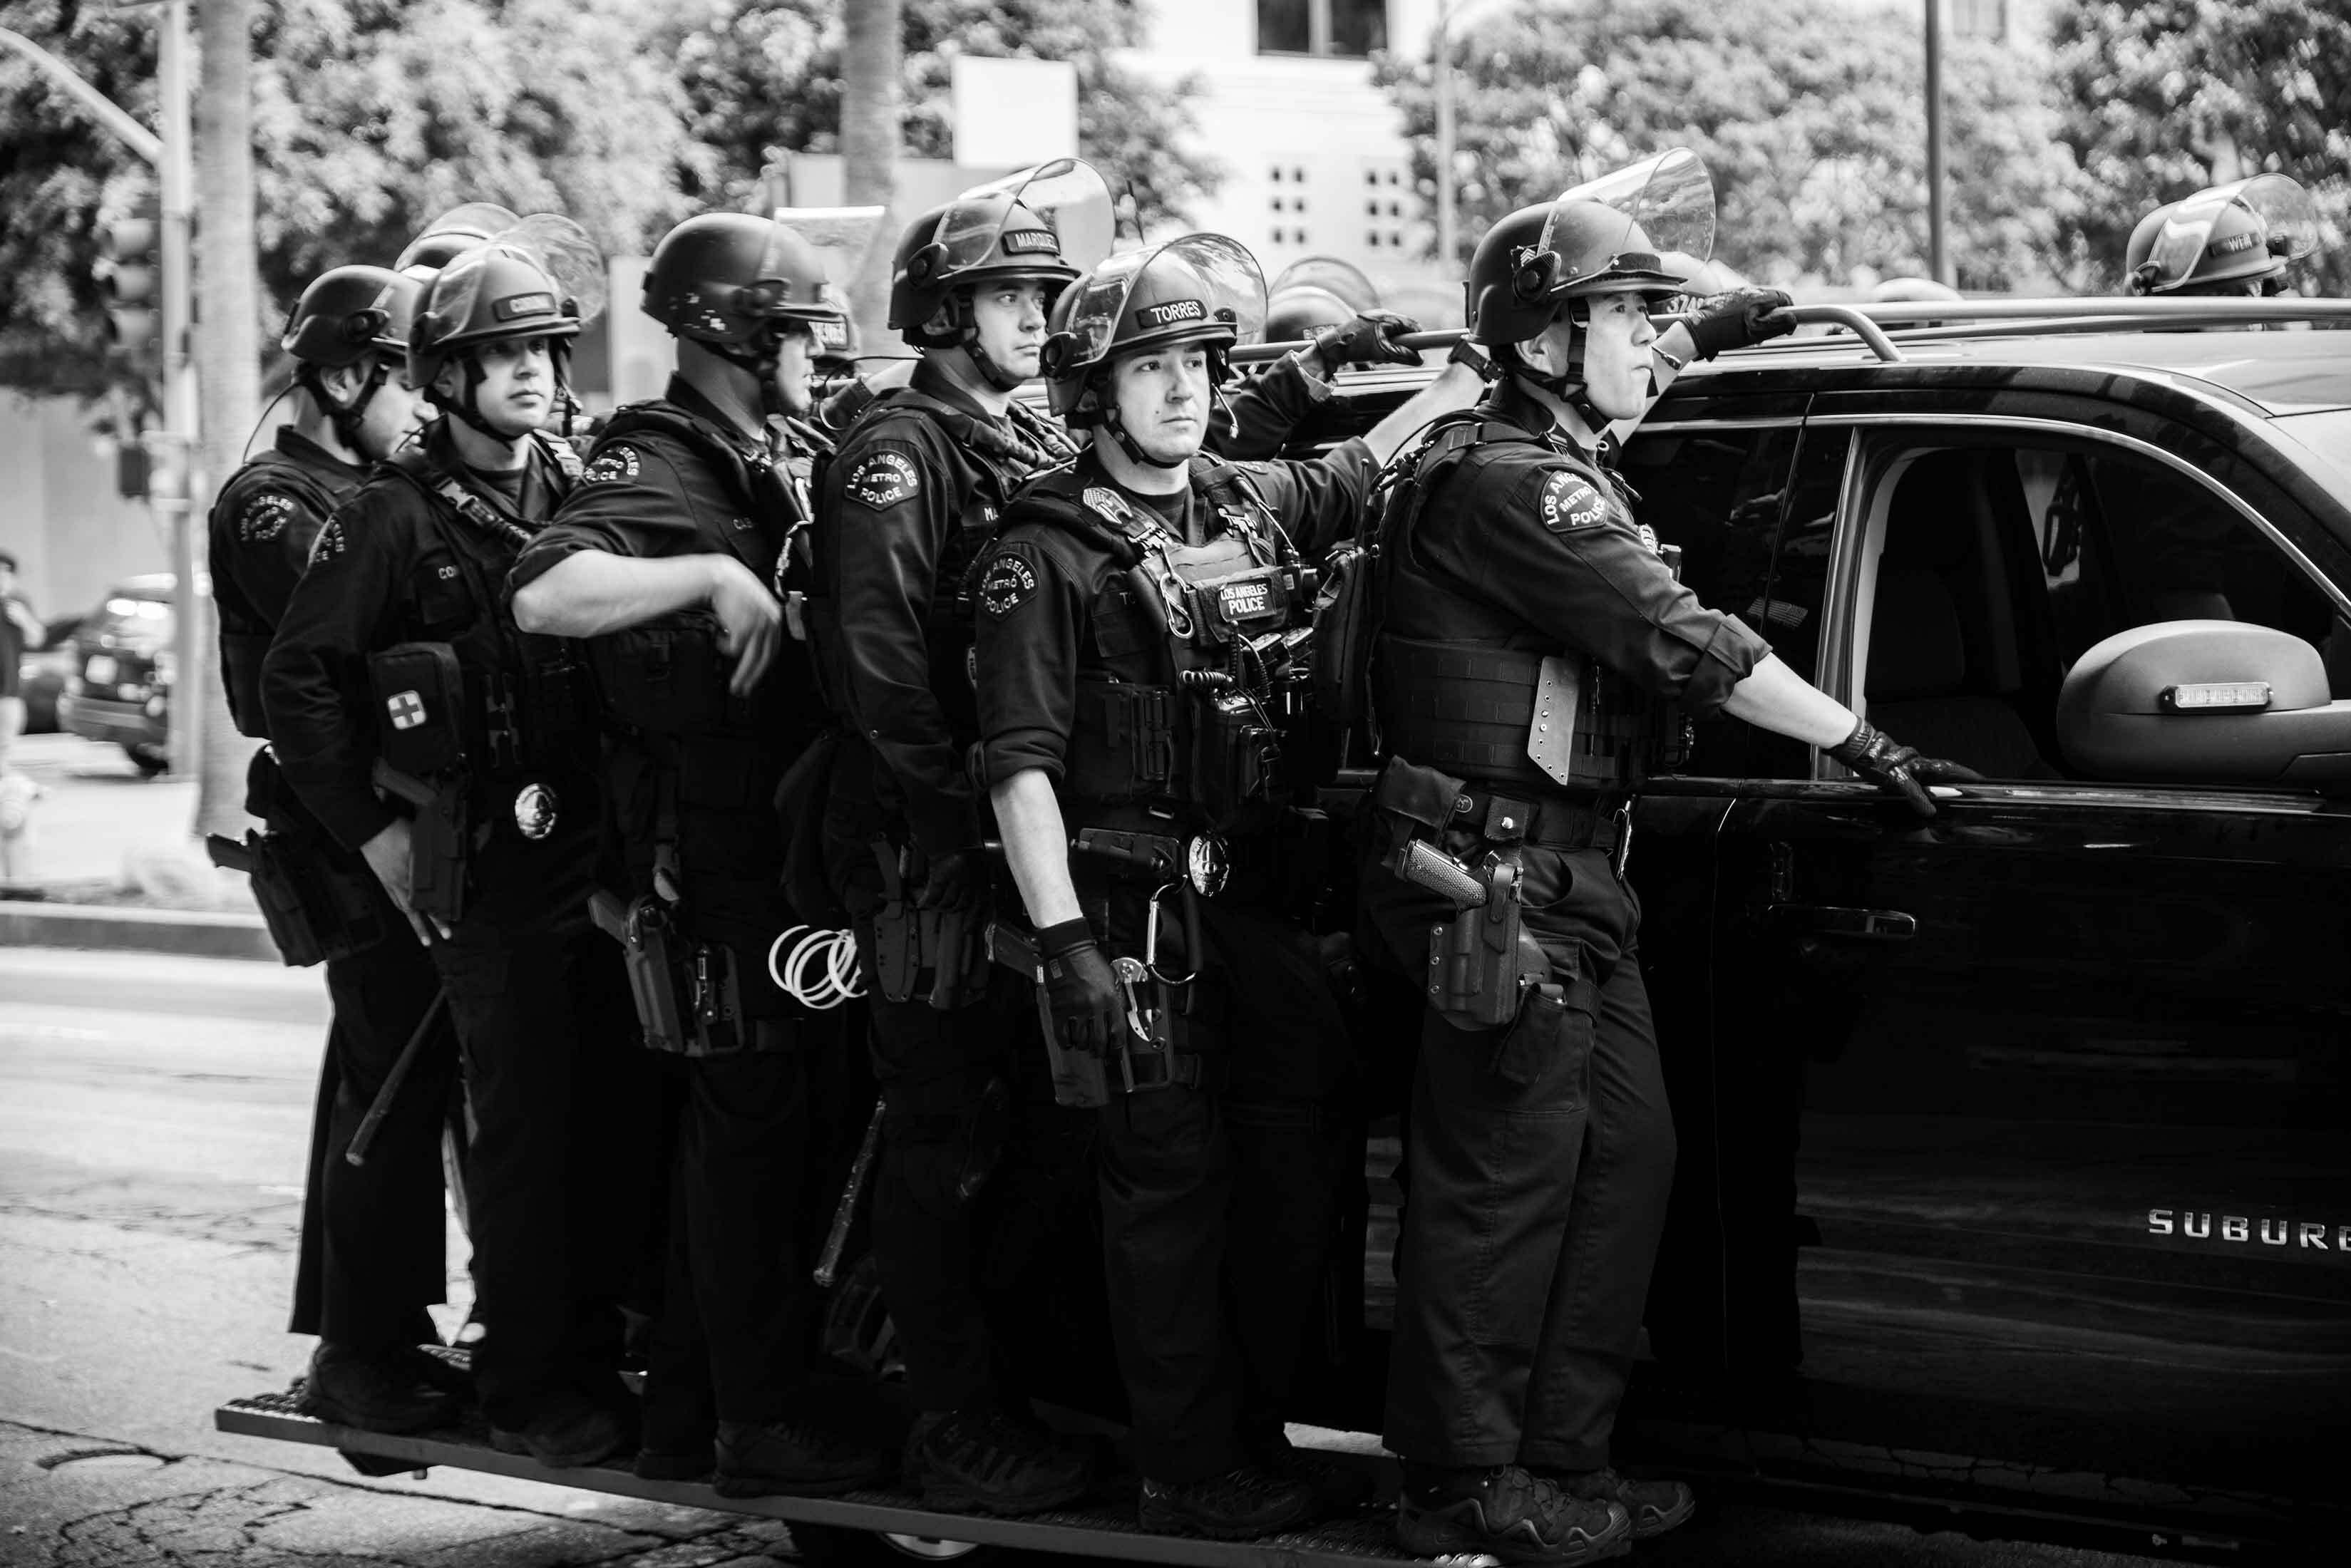 Officers of the Los Angeles Police Department during protests in Downtown L.A. on May 28.